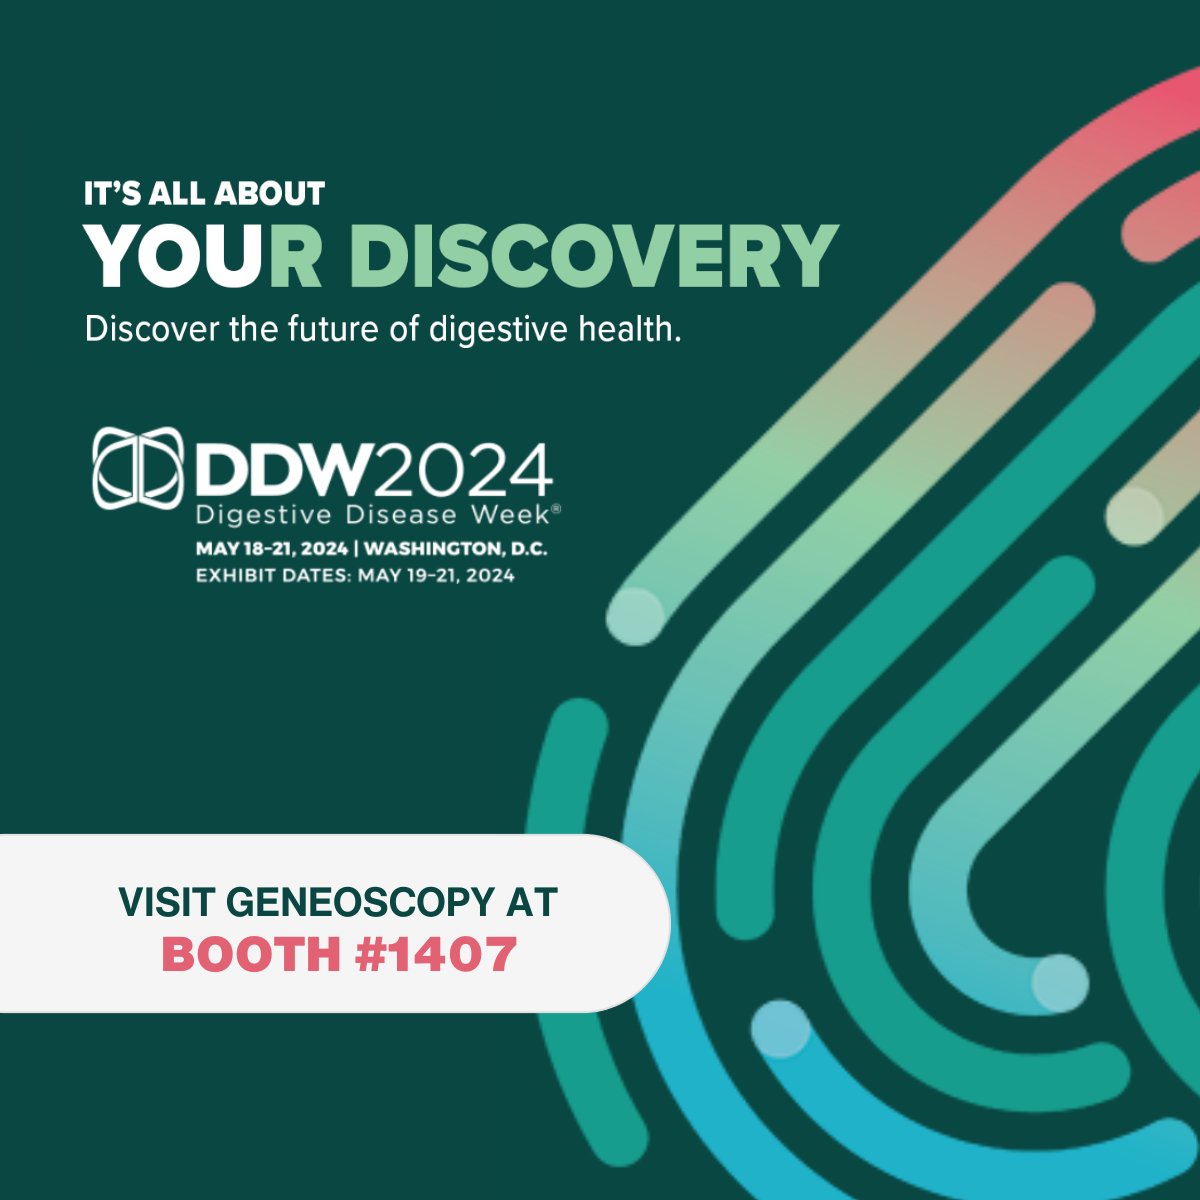 Geneoscopy is excited to attend Digestive Disease Week (DDW) in Washington, DC, May 18-21. Visit our expert team at Booth #1407 to learn more about our FDA-approved at-home colorectal cancer screening test, ColoSense. Mark your calendars for our two poster presentations, May 18